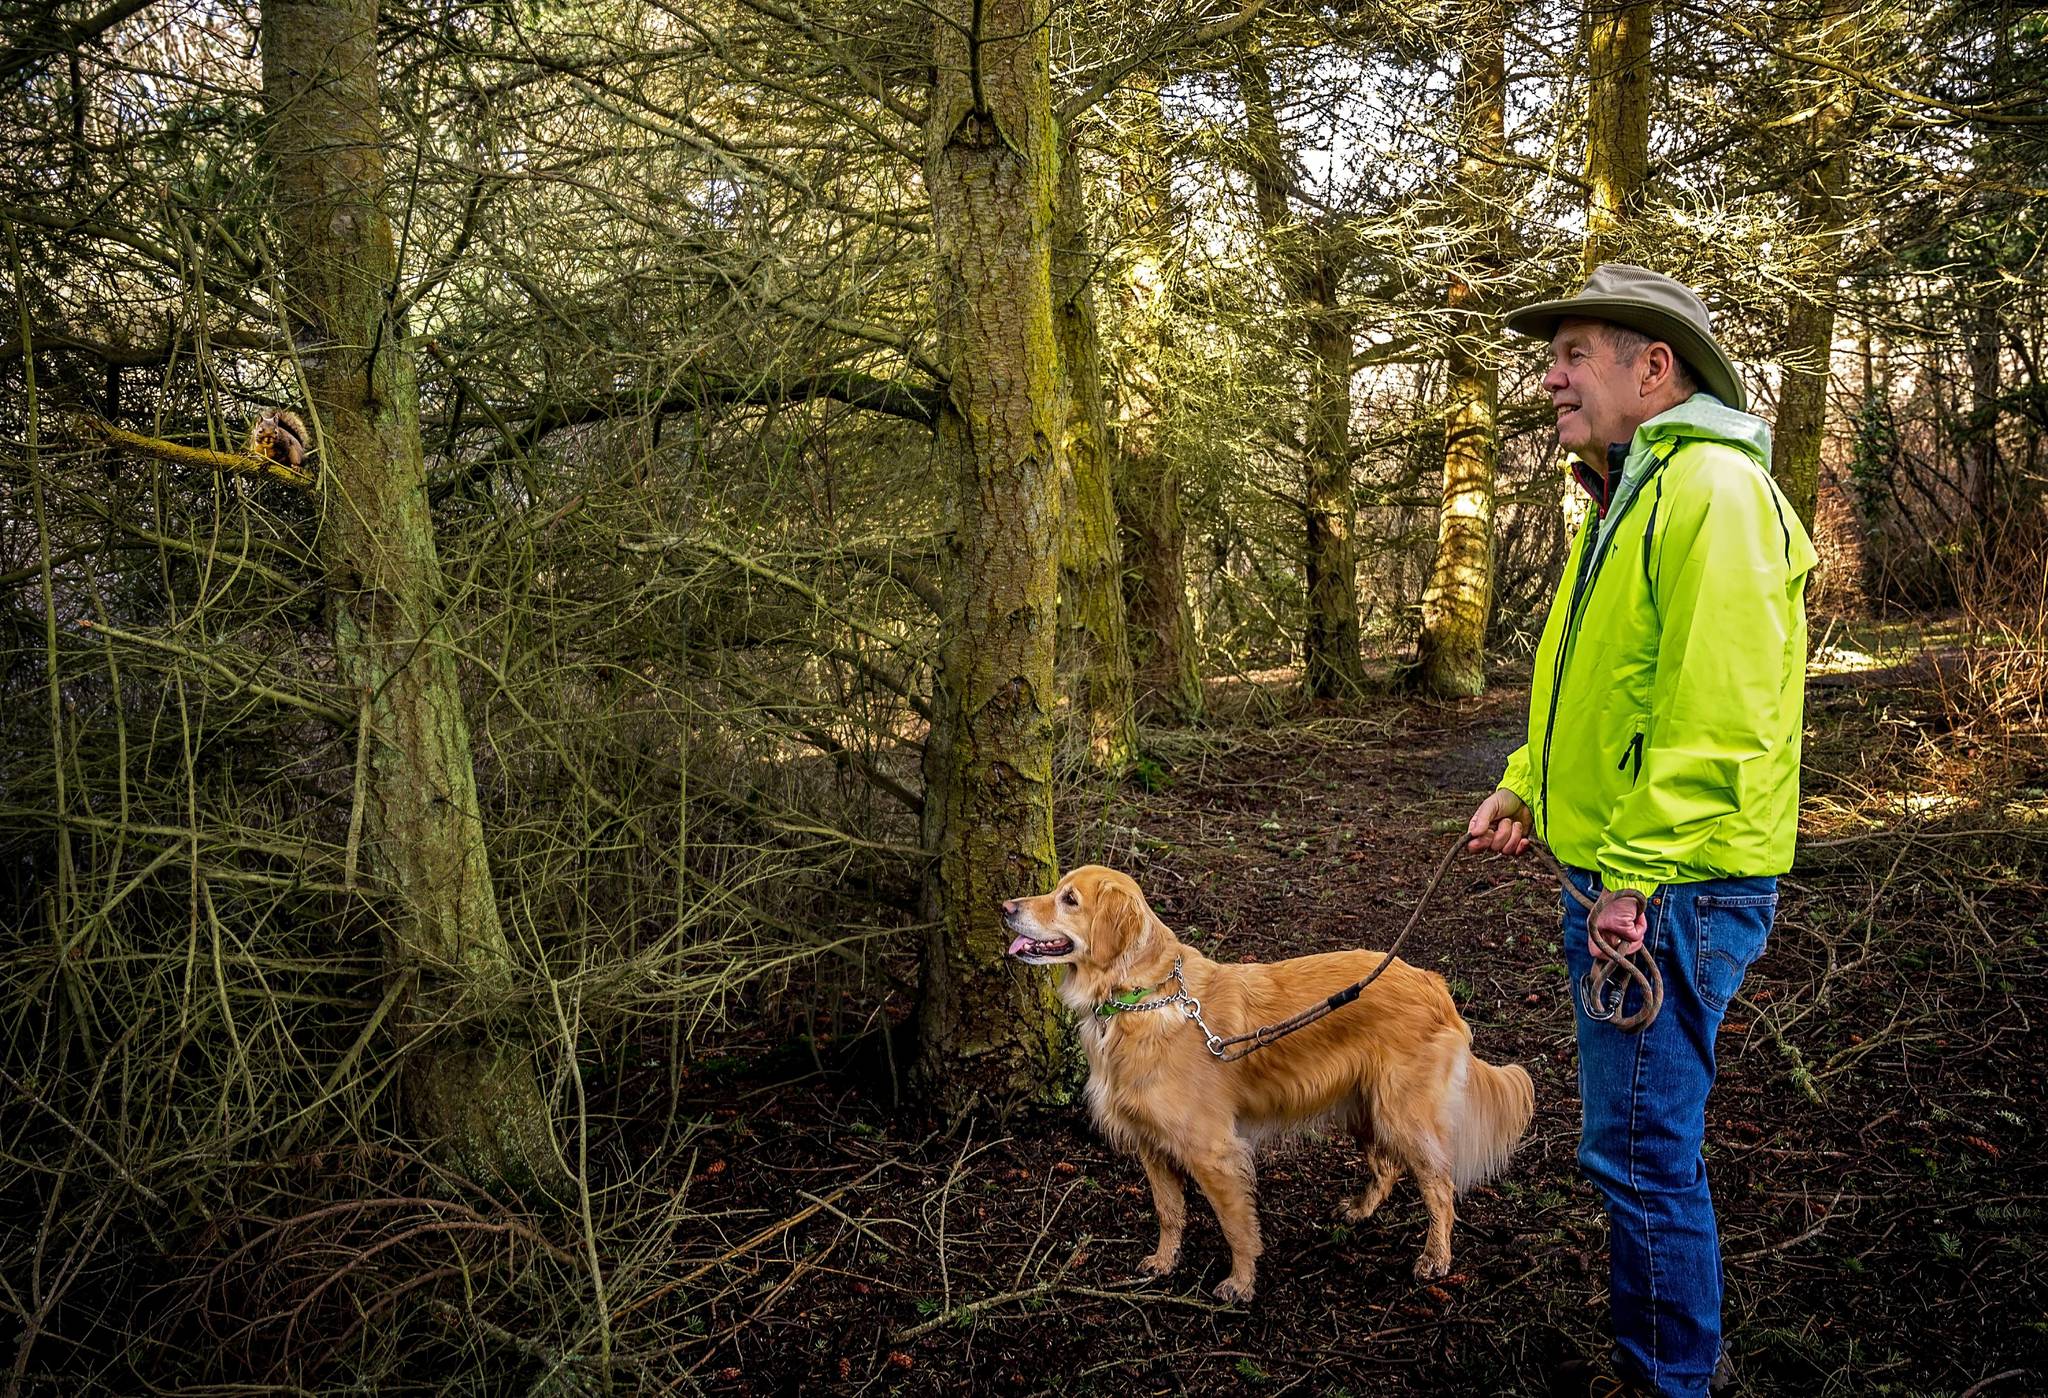 Bill Headridge and his dog Ginger appear delighted by the discovery of a Douglas squirrel during a late February walk at Admiralty Inlet Preserve, protected by the Whidbey Camano Land Trust. (Photo by Pam Headridge)